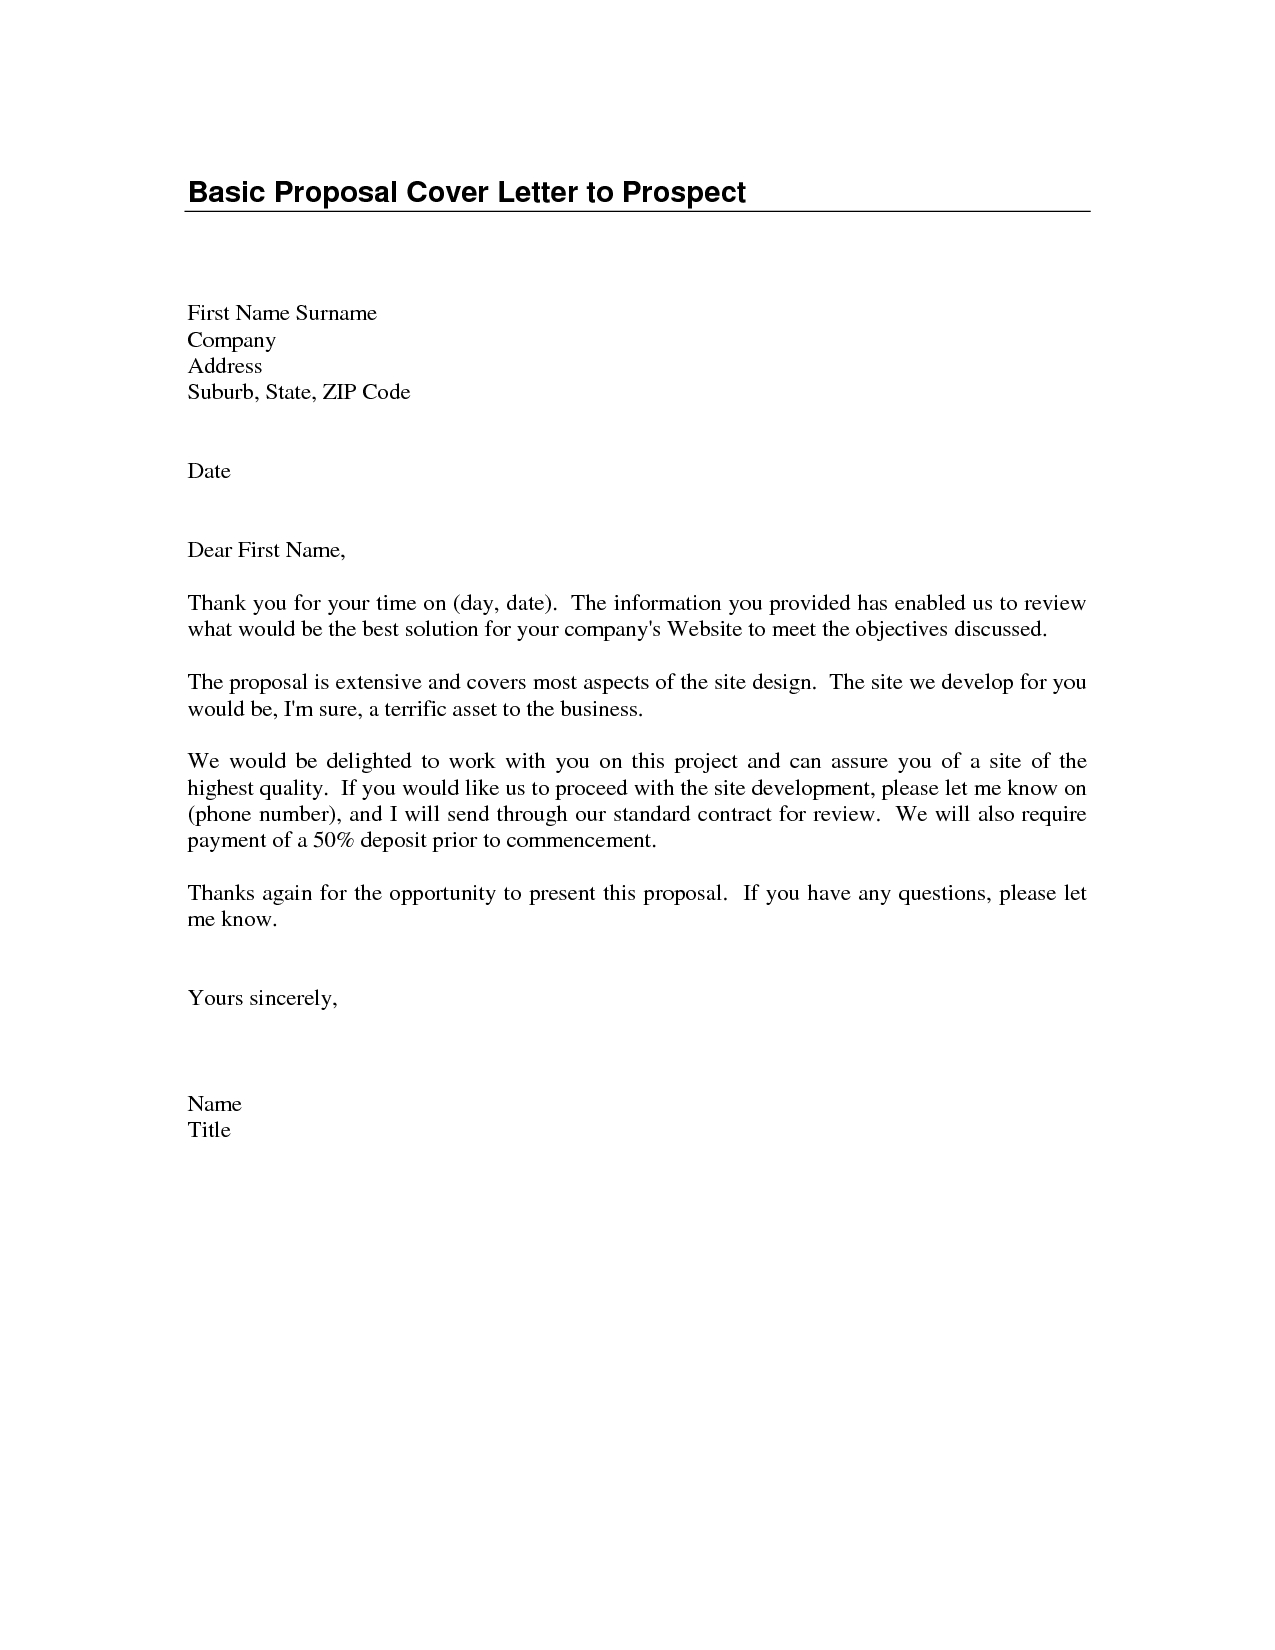 New Cover Letter Examples Basic Image - Gover